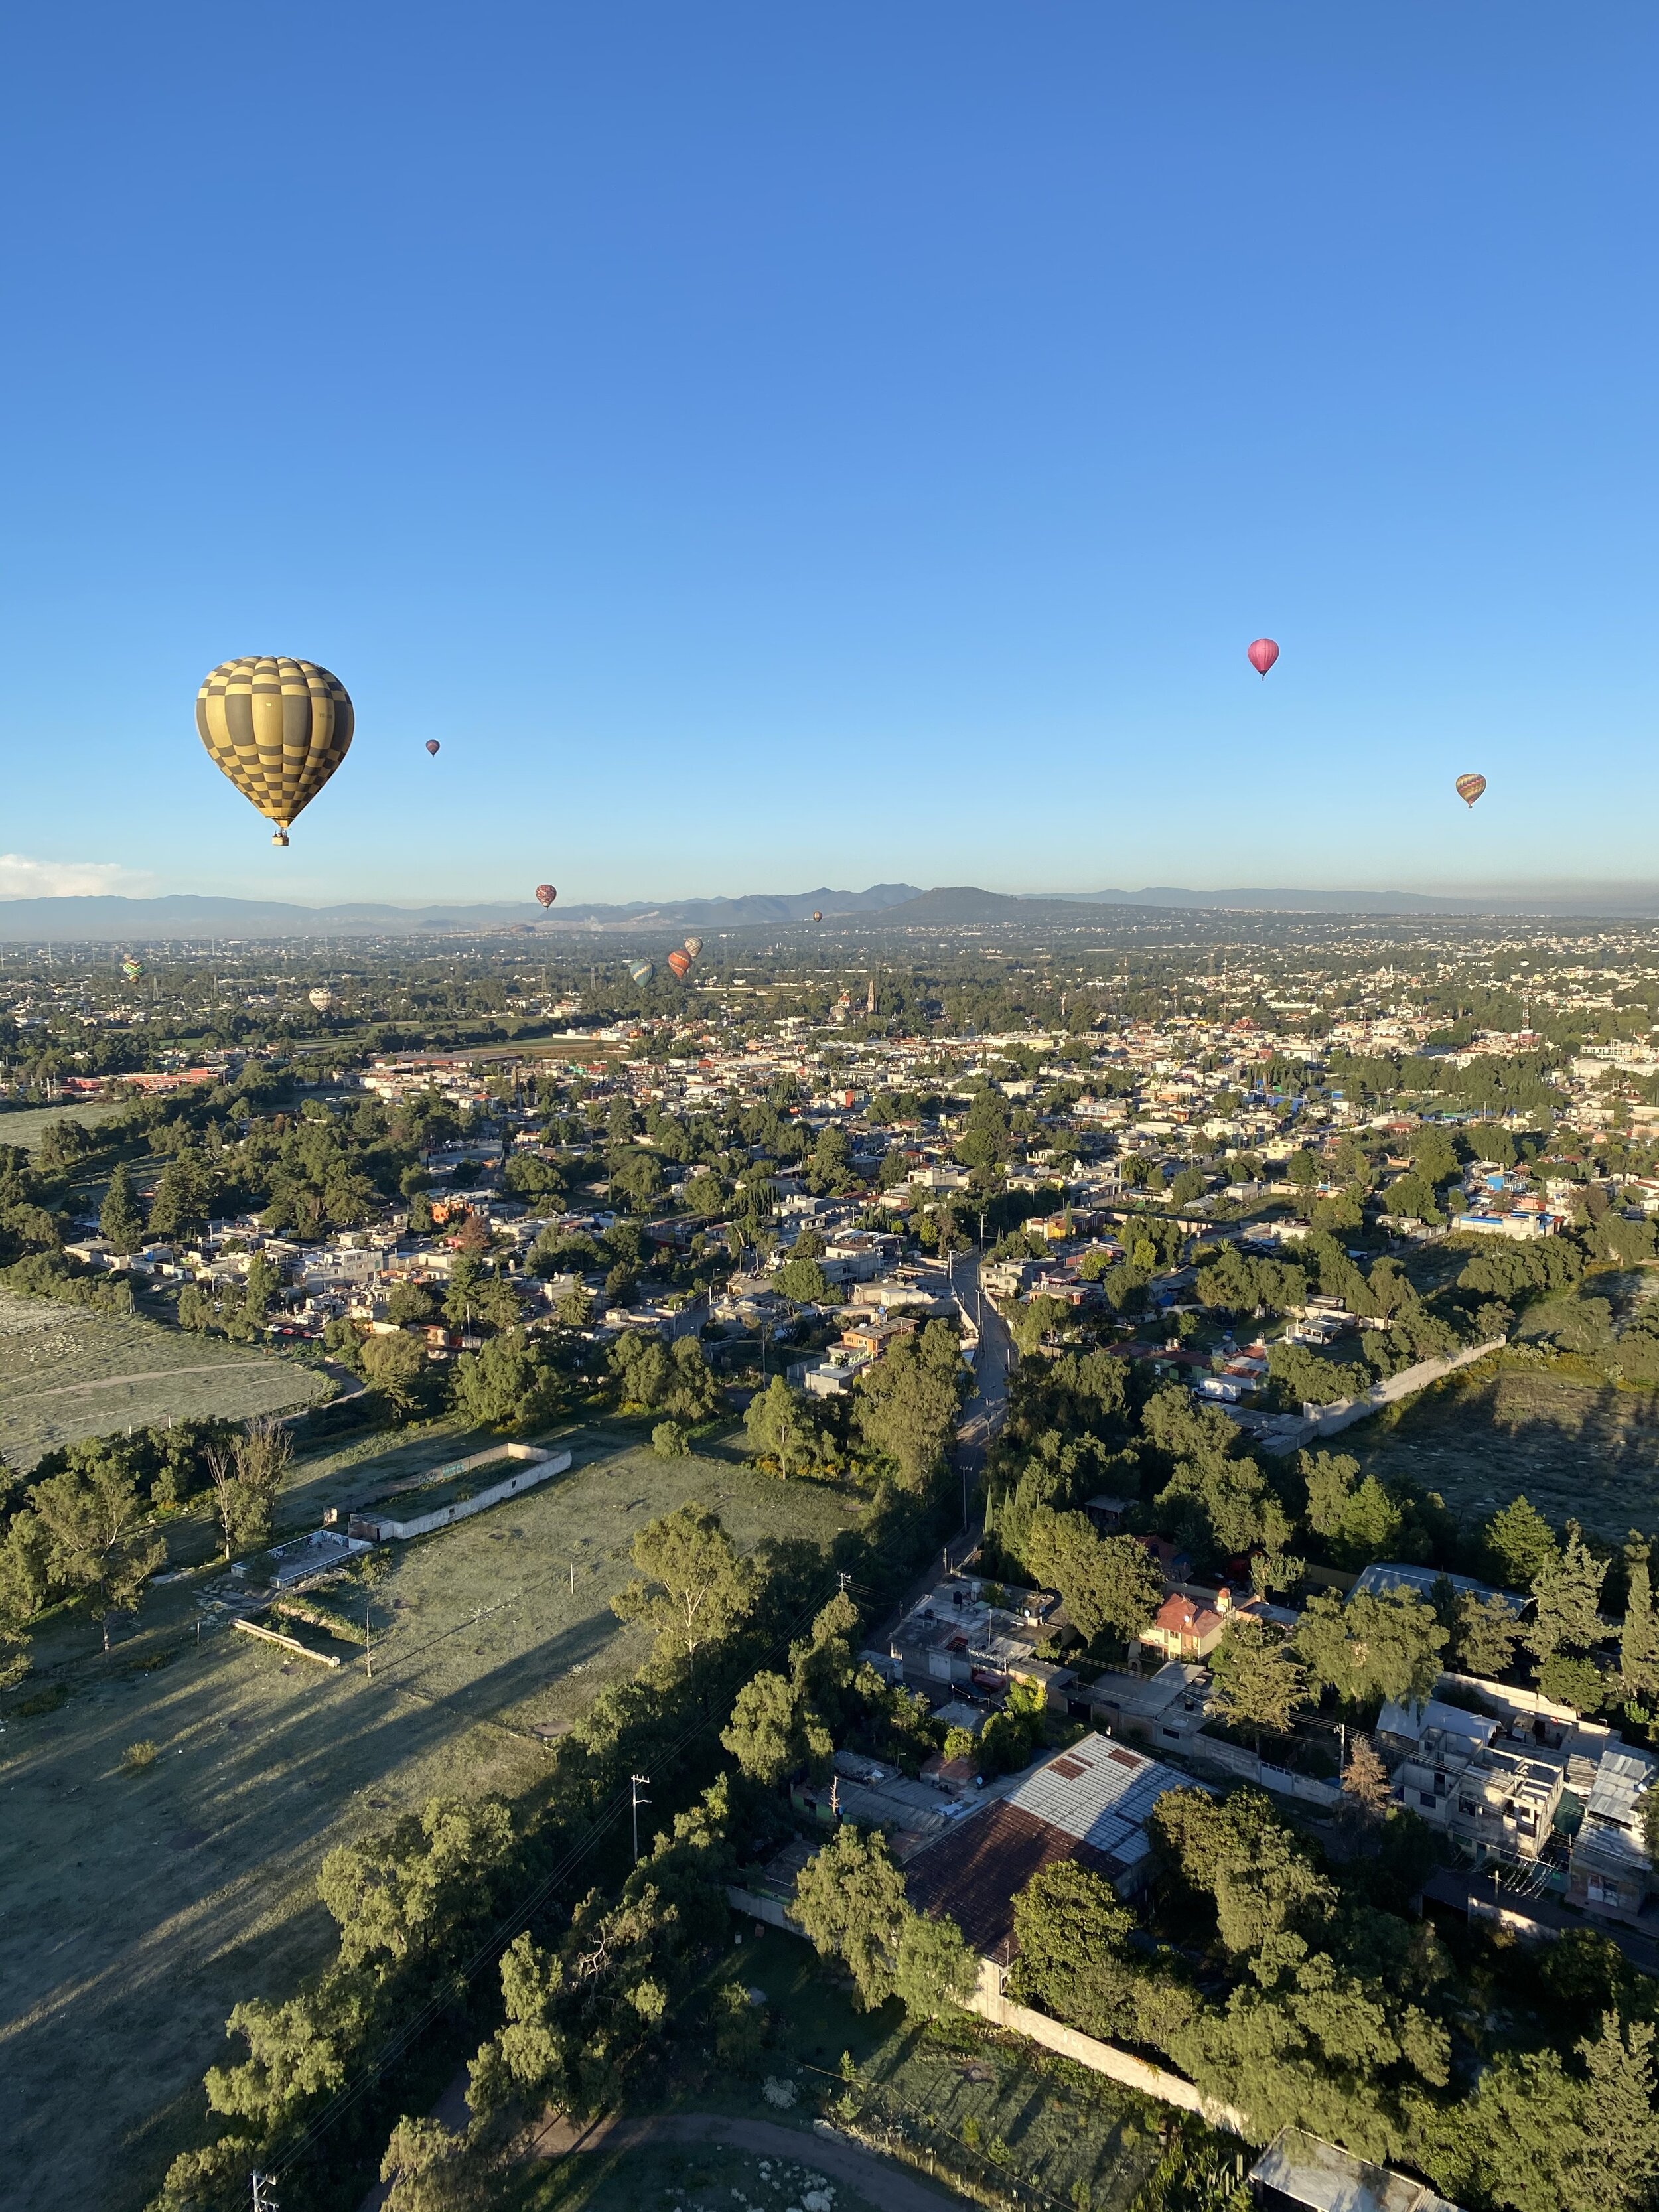 View from Hot Air Balloon